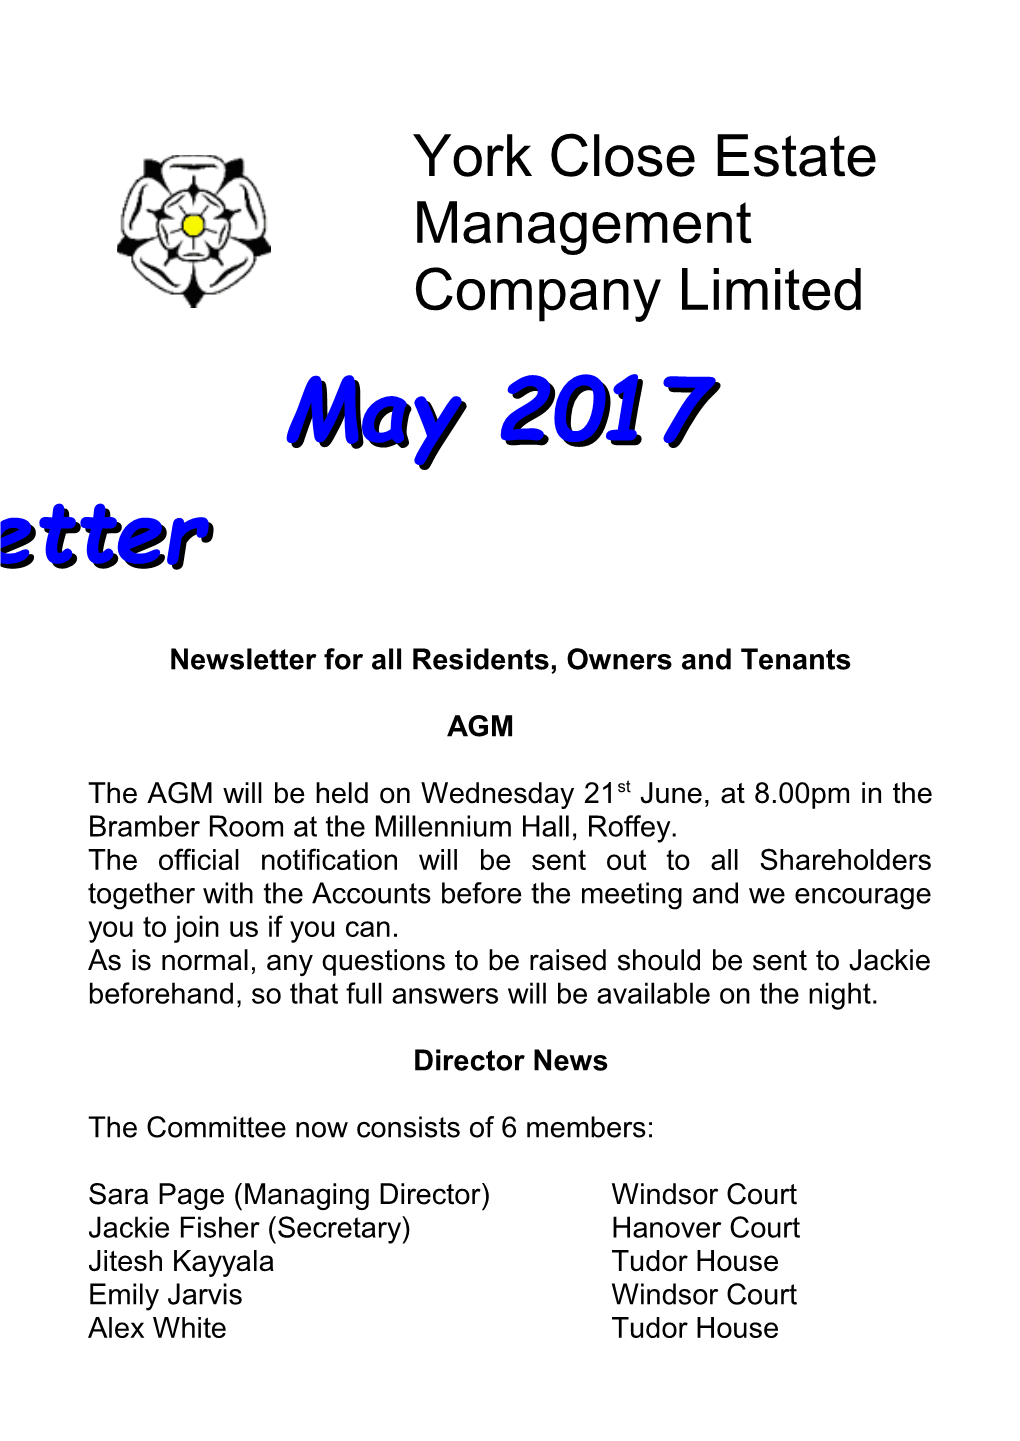 Newsletter for All Residents, Owners and Tenants